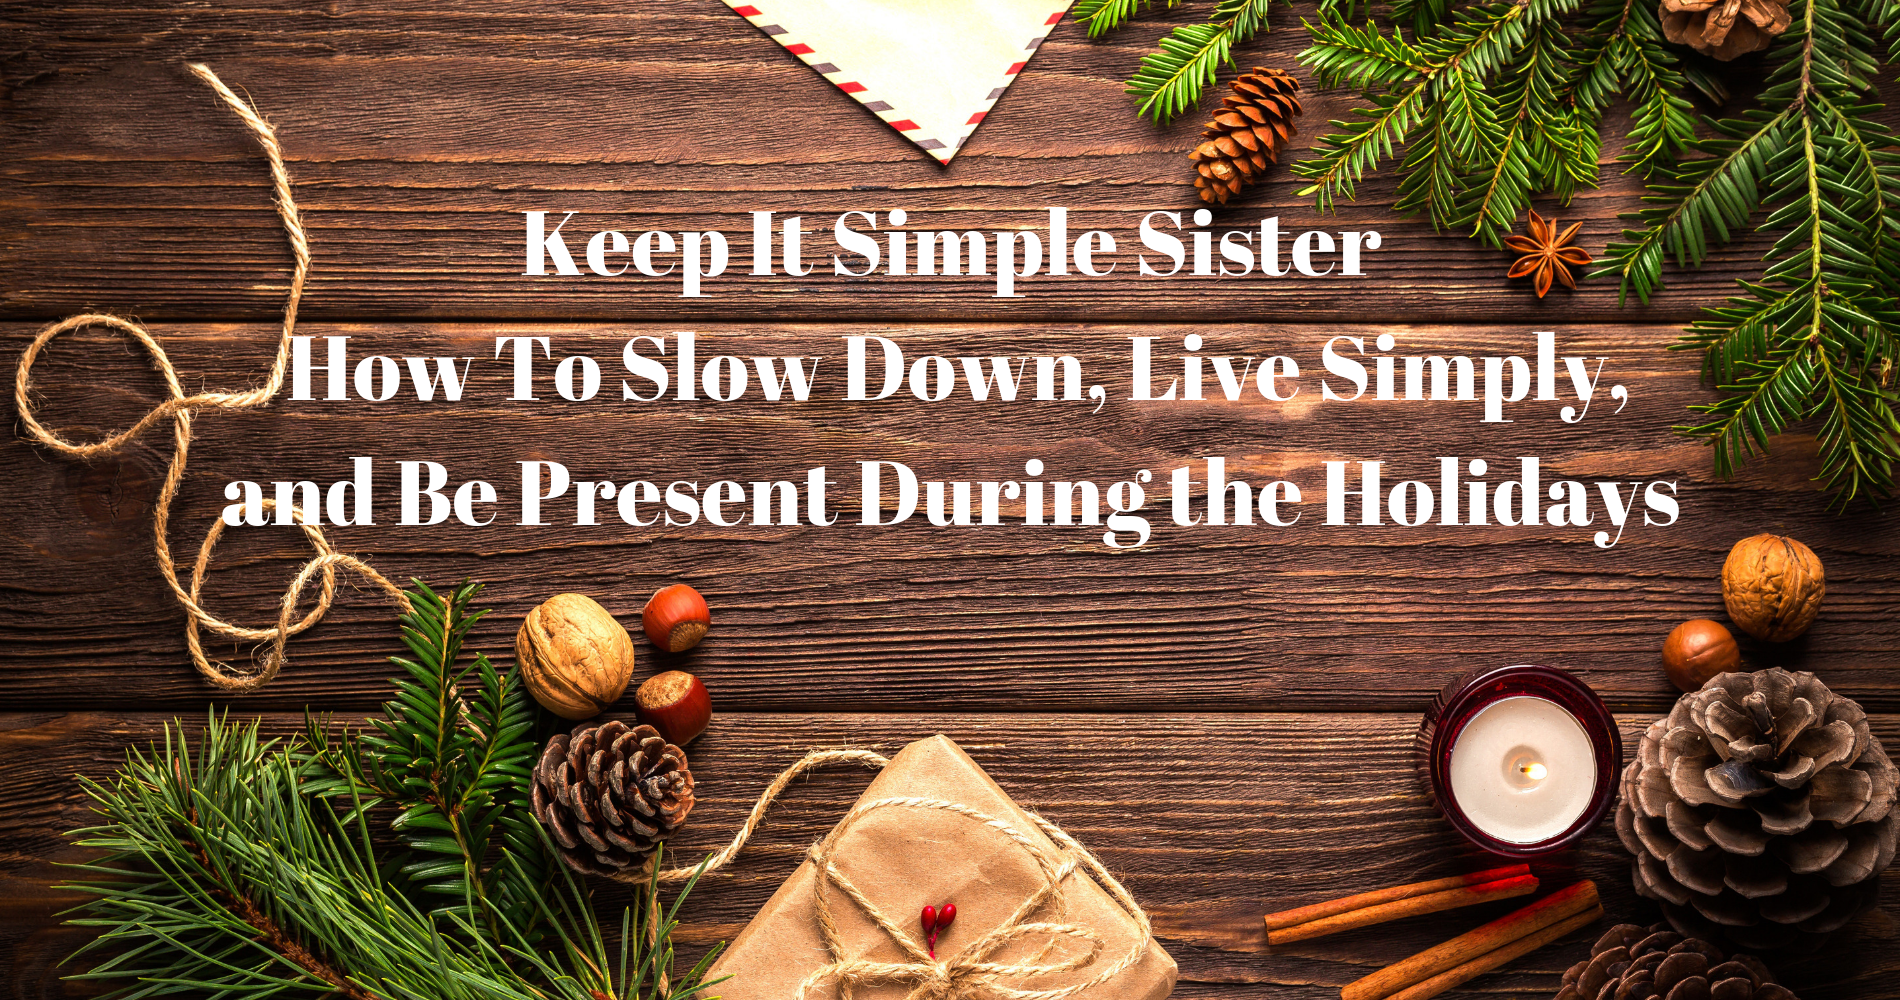 Keep It Simple Sister-My Guide to being more Intentional and Mindful this Holiday Season